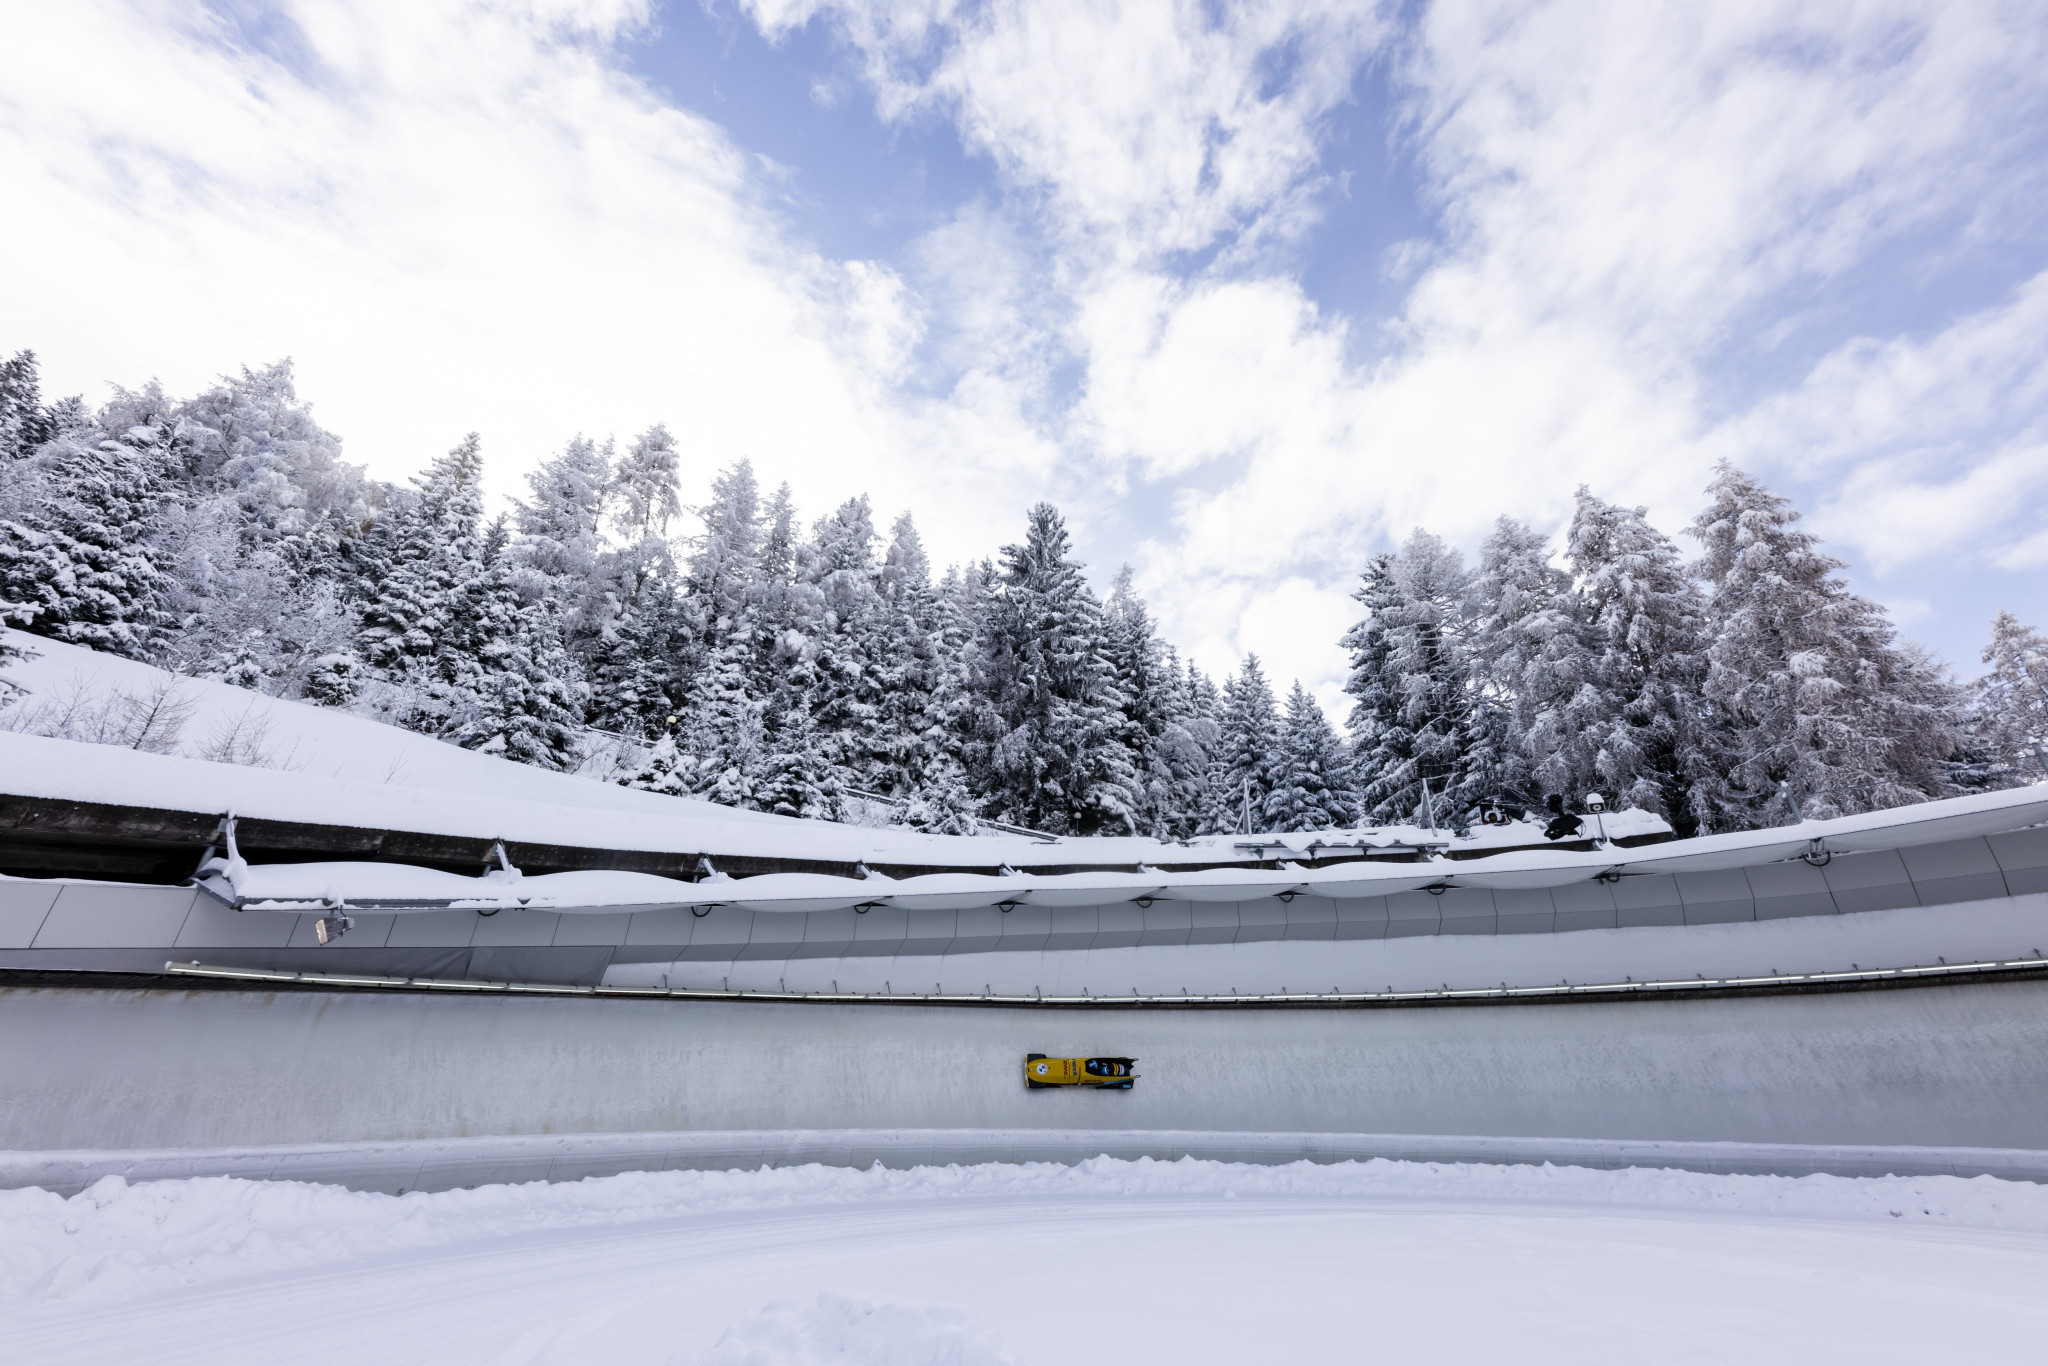 The Innsbruck Igls sliding centre in Austria stands ready to host bobsleigh, skeleton and luge events for the Milan Cortina 2026 Winter Olympics if the proposed work on the Eugenio Monti track cannot be done in time ©Getty Images 